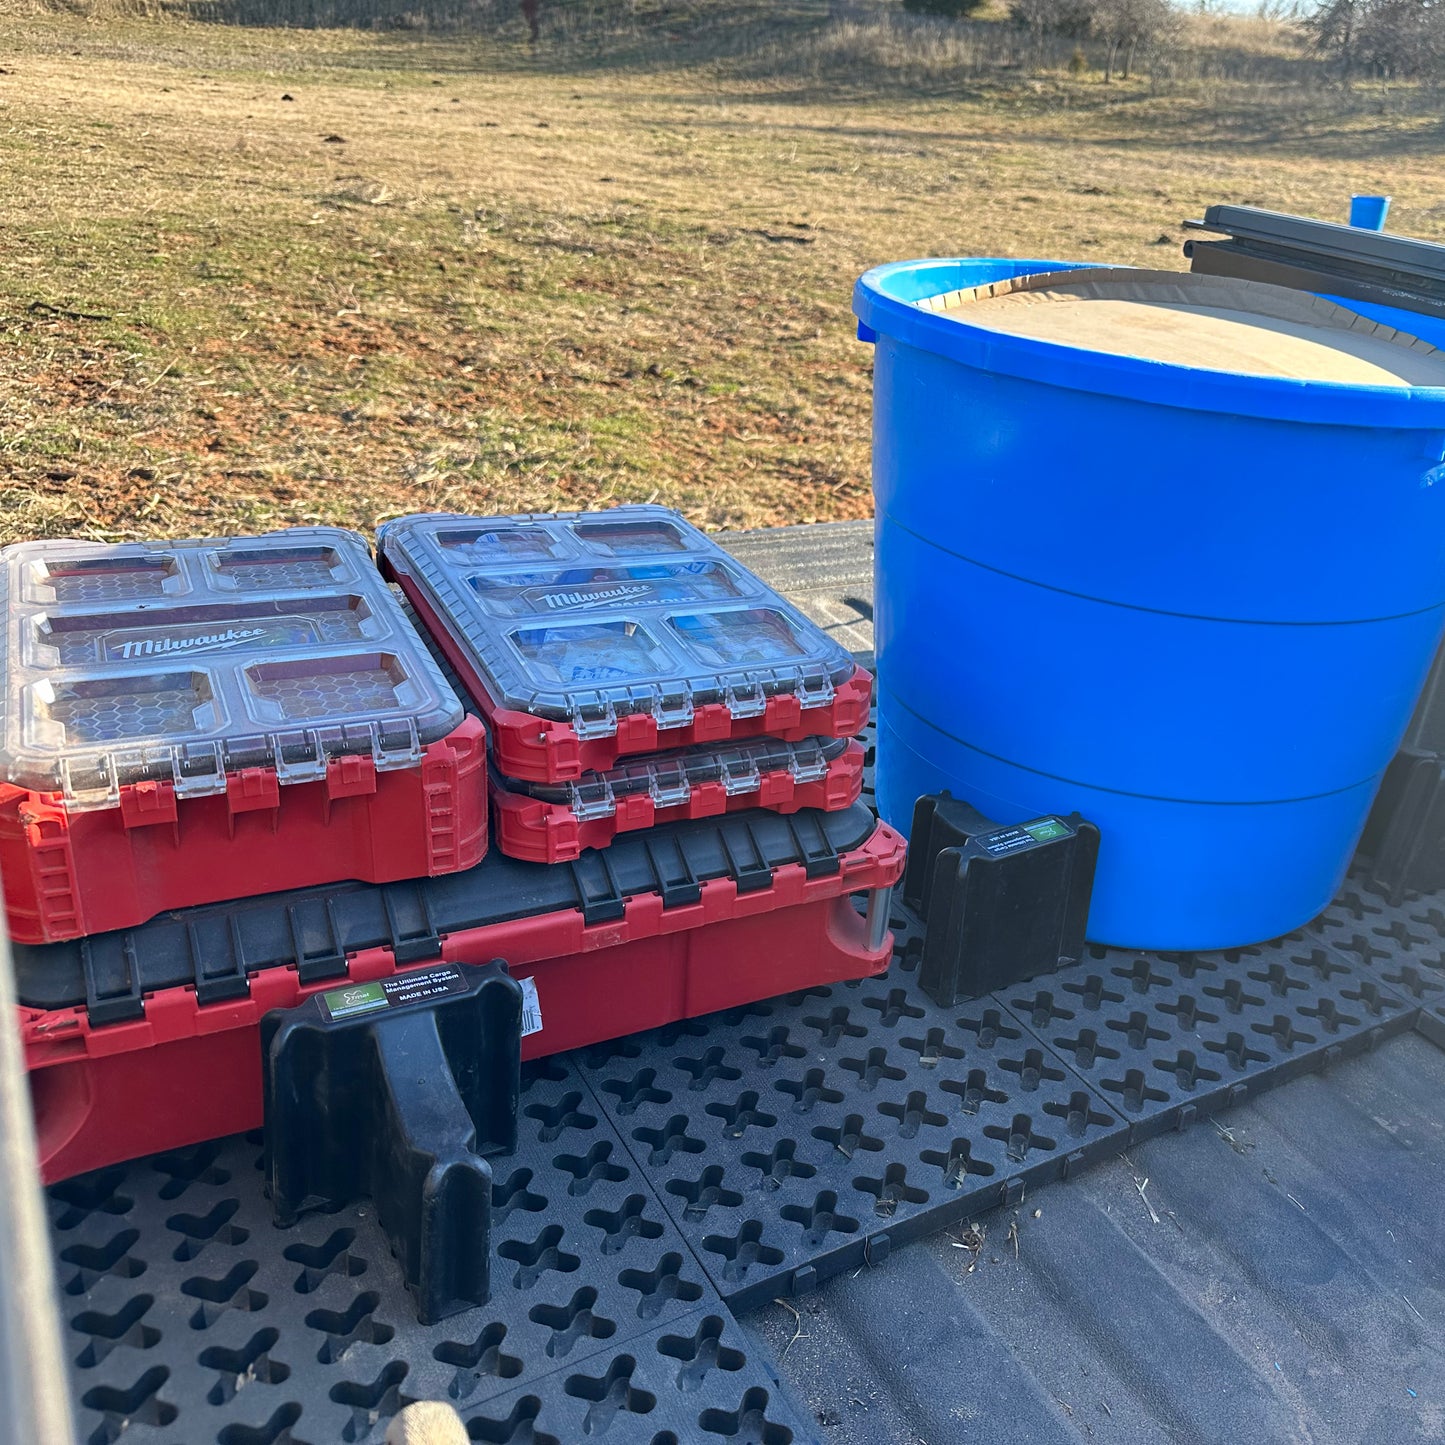 Tool boxes and a cattle protein tube sitting on Tmat in the back of a pickup on a farm.